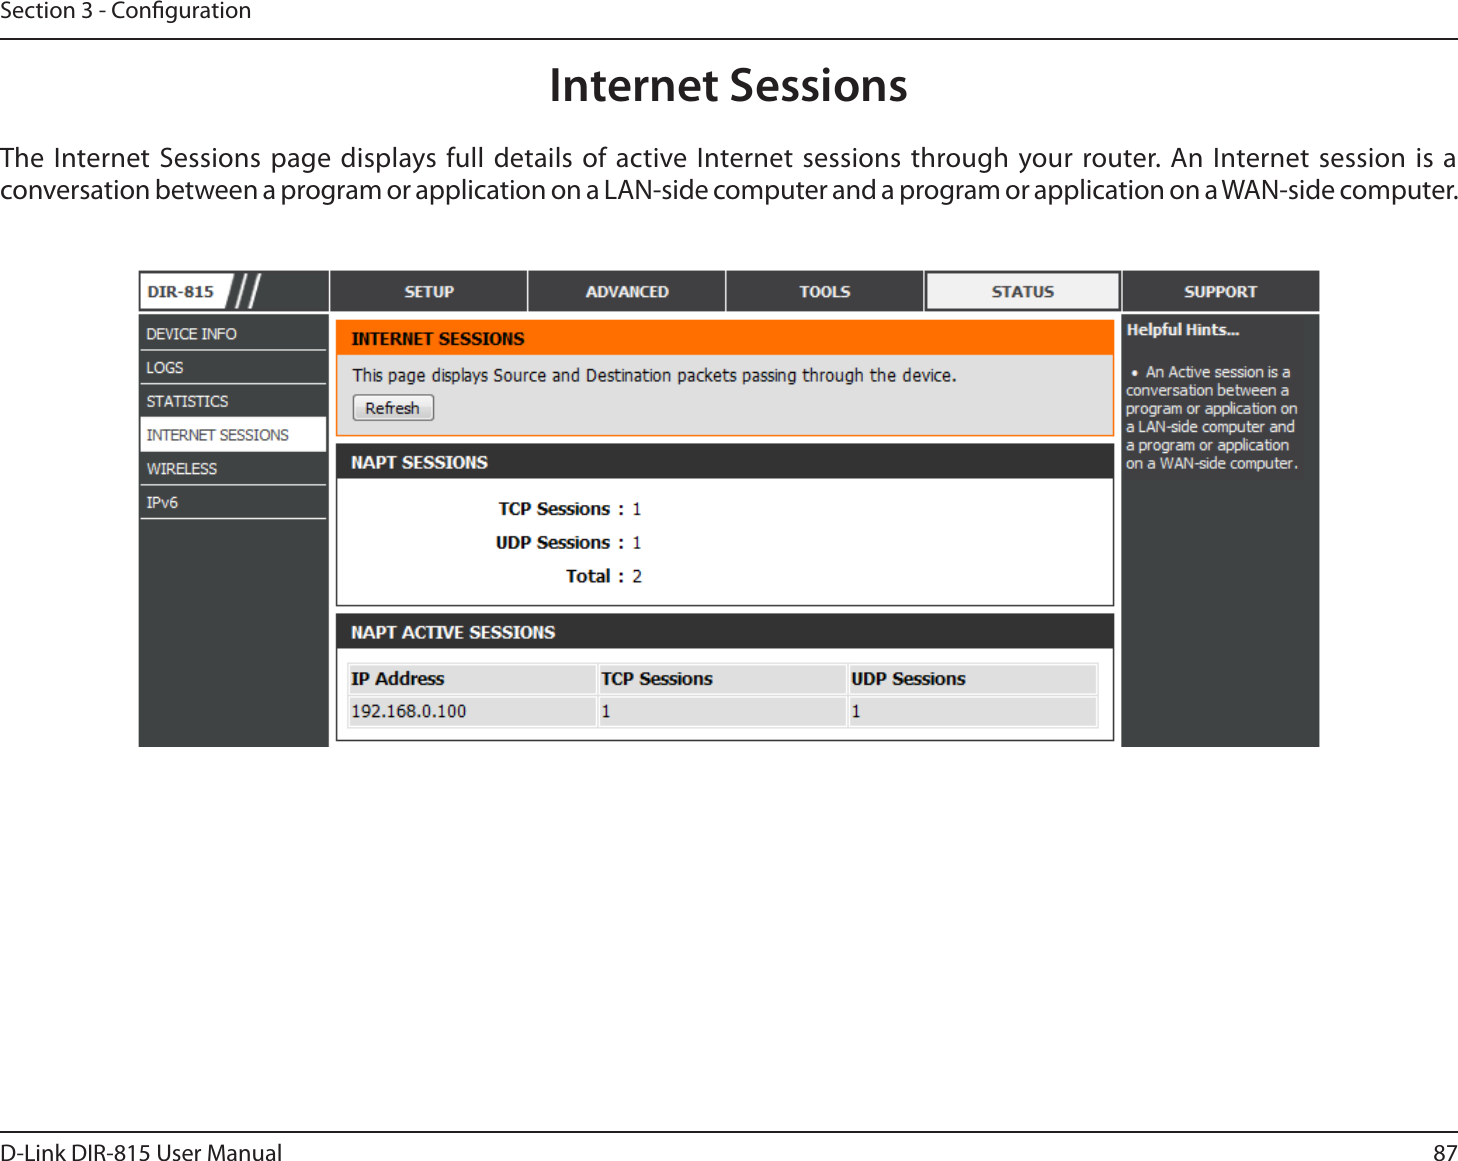 87D-Link DIR-815 User ManualSection 3 - CongurationInternet SessionsThe Internet Sessions page displays full details of active Internet sessions through your router. An Internet session is a conversation between a program or application on a LAN-side computer and a program or application on a WAN-side computer. 